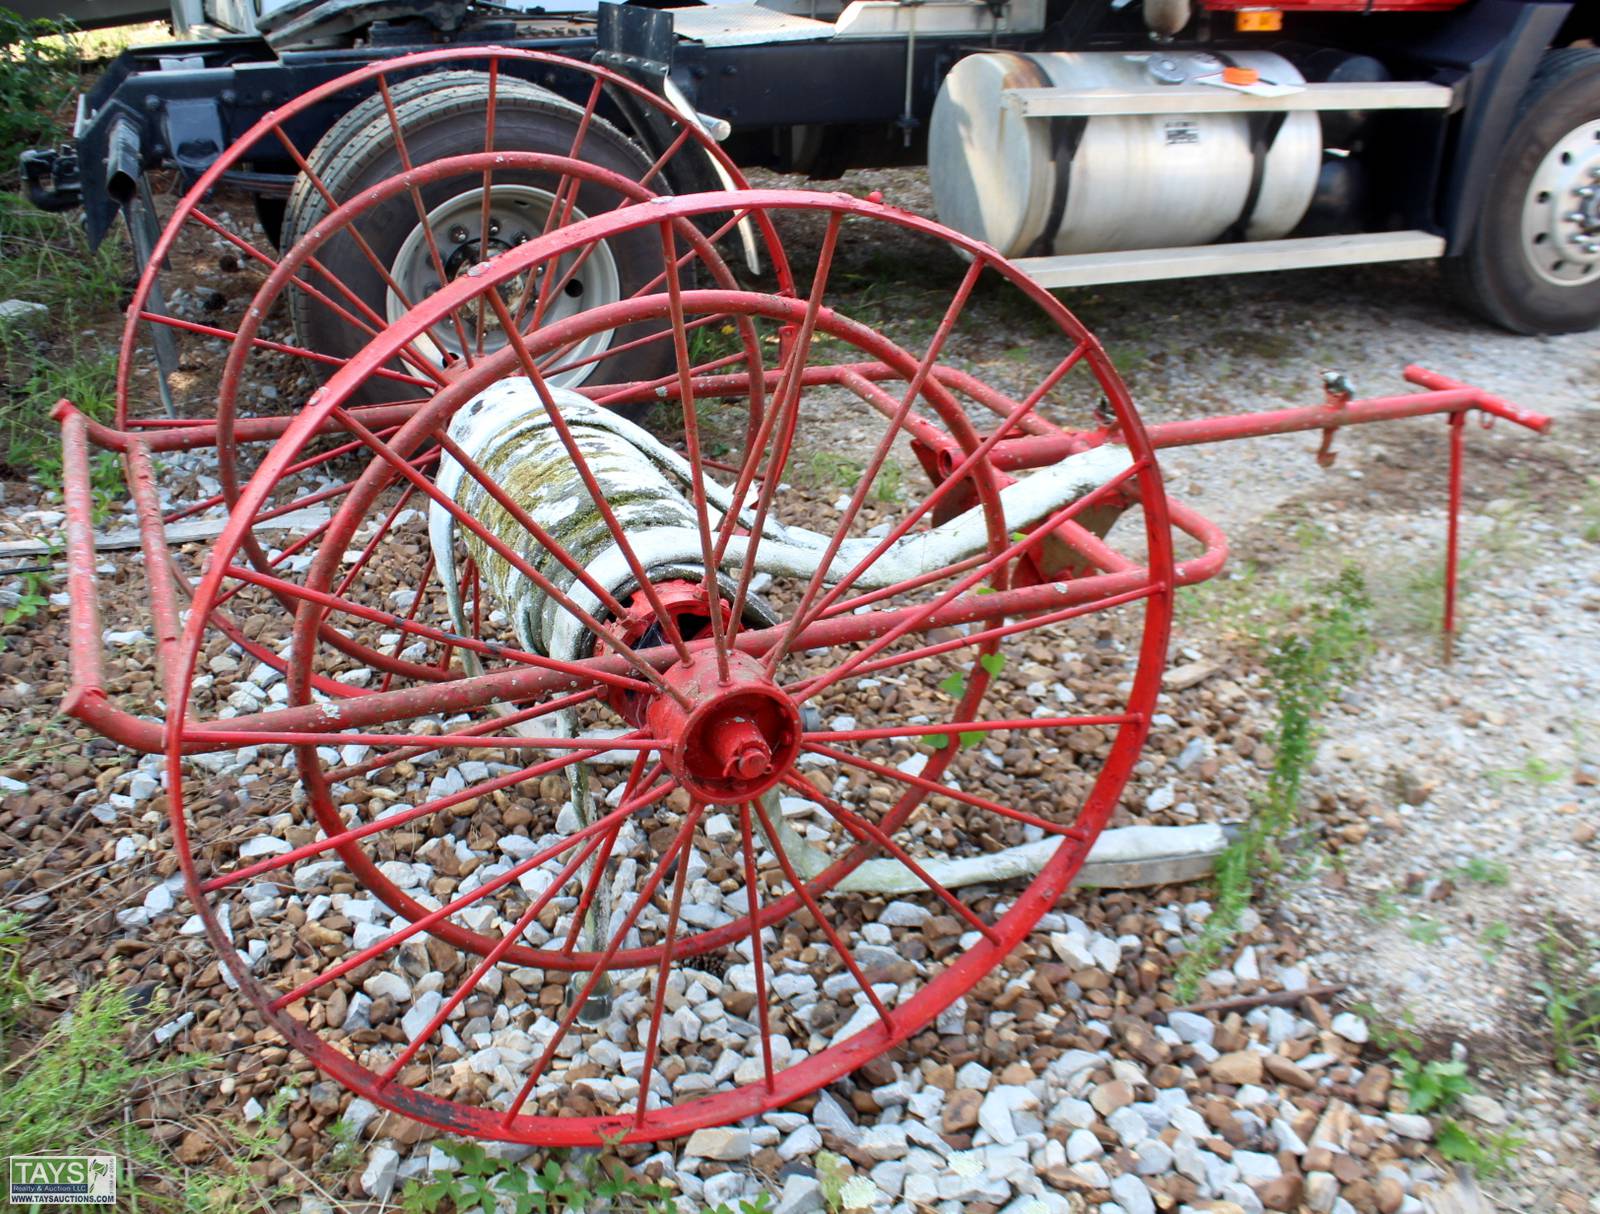 Tays Realty & Auction - Auction: ONLINE ABSOLUTE AUCTION: HEAVY &  CONSTRUCTION EQUIPMENT - VEHICLES - SHOP EQUIPMENT - TOOLS ITEM: Antique  Fire Hose Cart with Hose